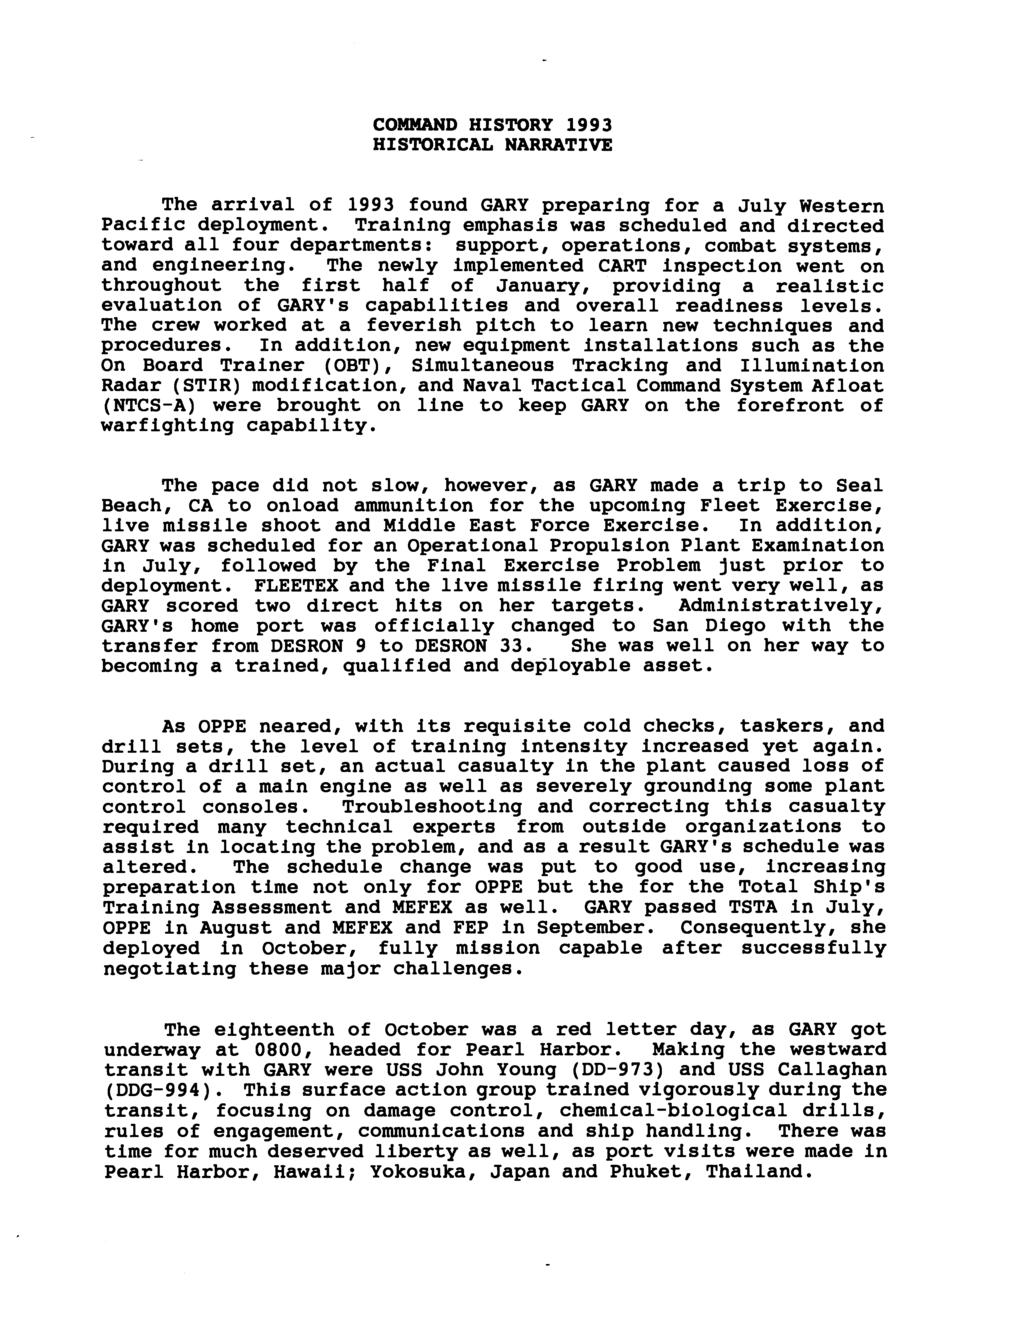 COMMAND HISTORY 1993 HISTORICAL NARRATIVE The arrival of 1993 found GARY preparing for a July Western Pacific deployment.